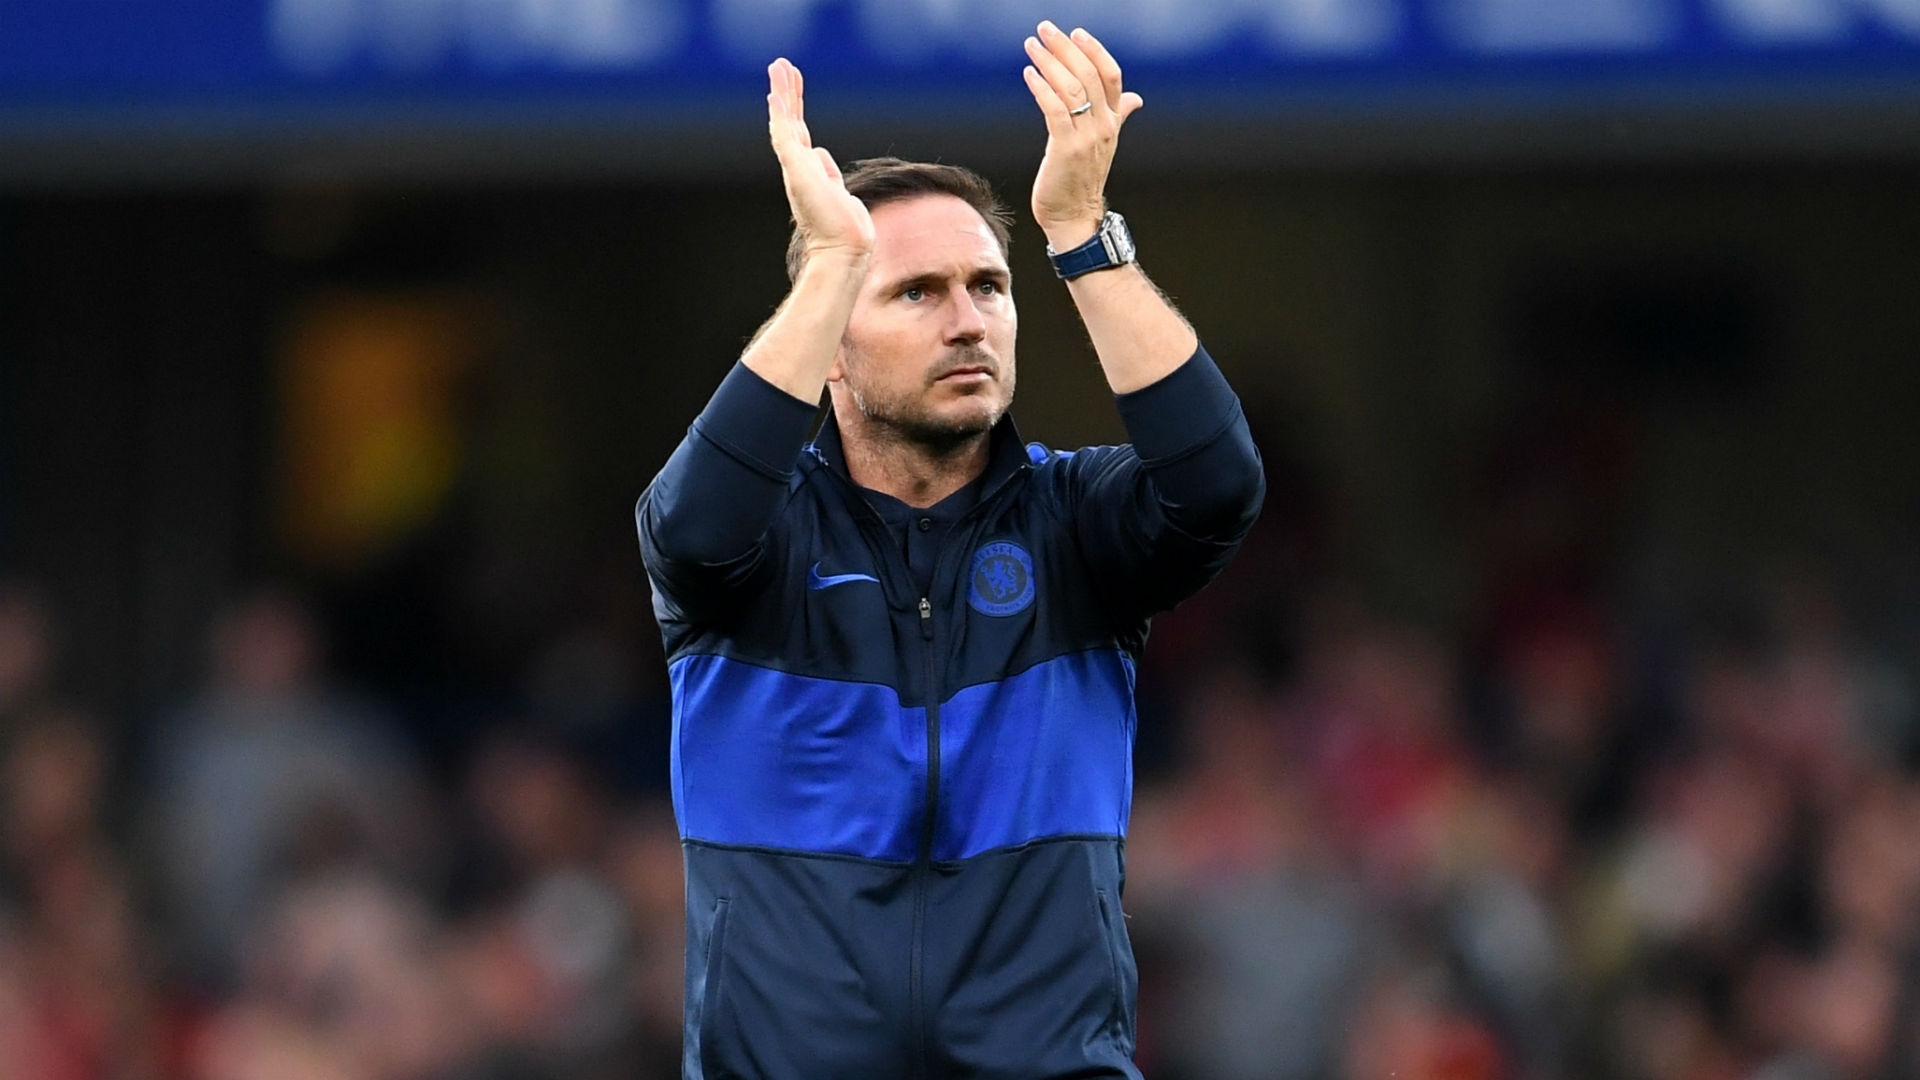 After losing 2-1 to Liverpool at Stamford Bridge, Frank Lampard said his Chelsea side should aim to reach the Reds' level.